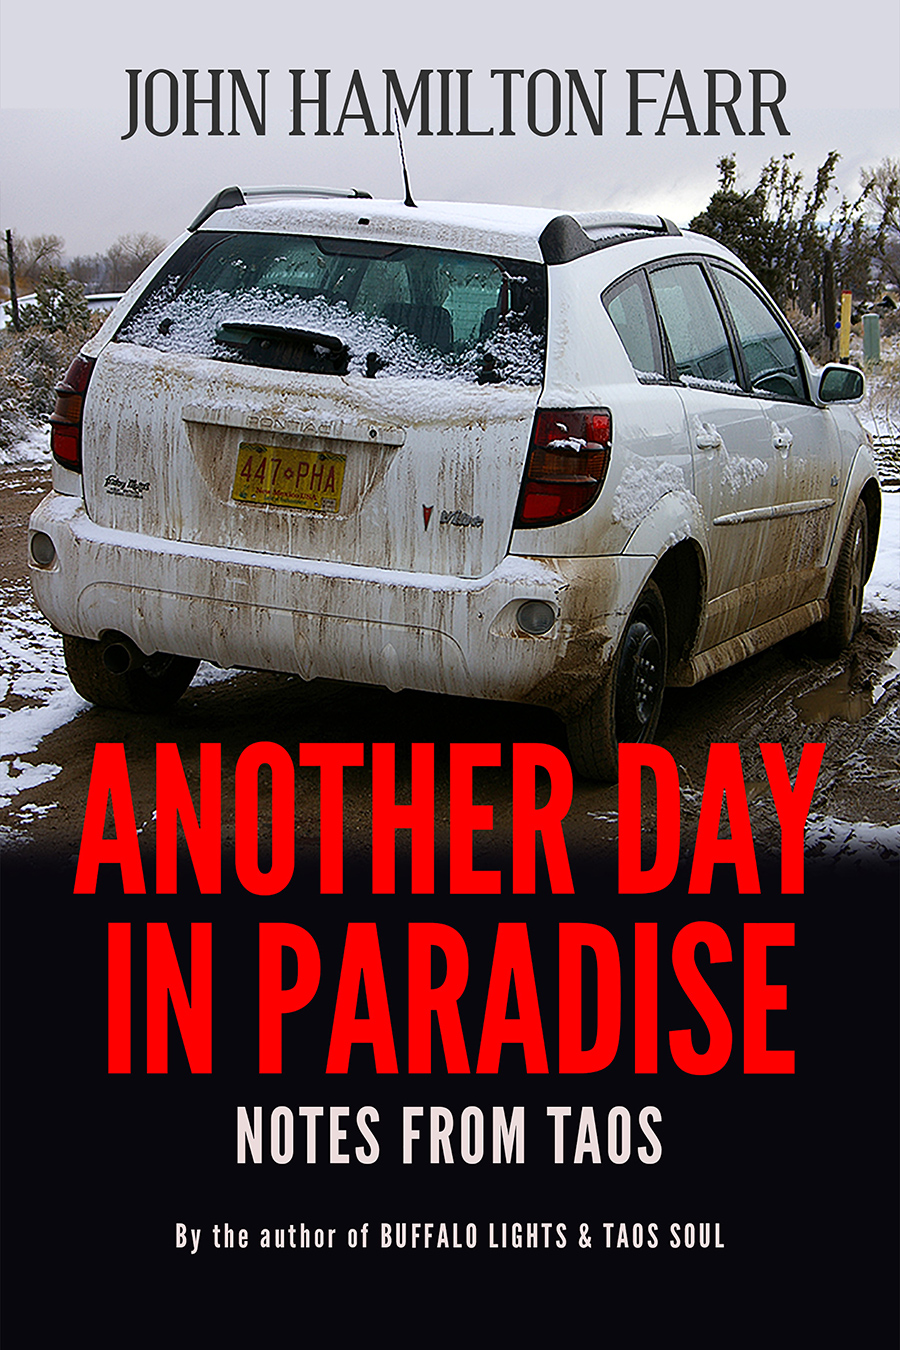 ANOTHER DAY IN PARADISE book cover